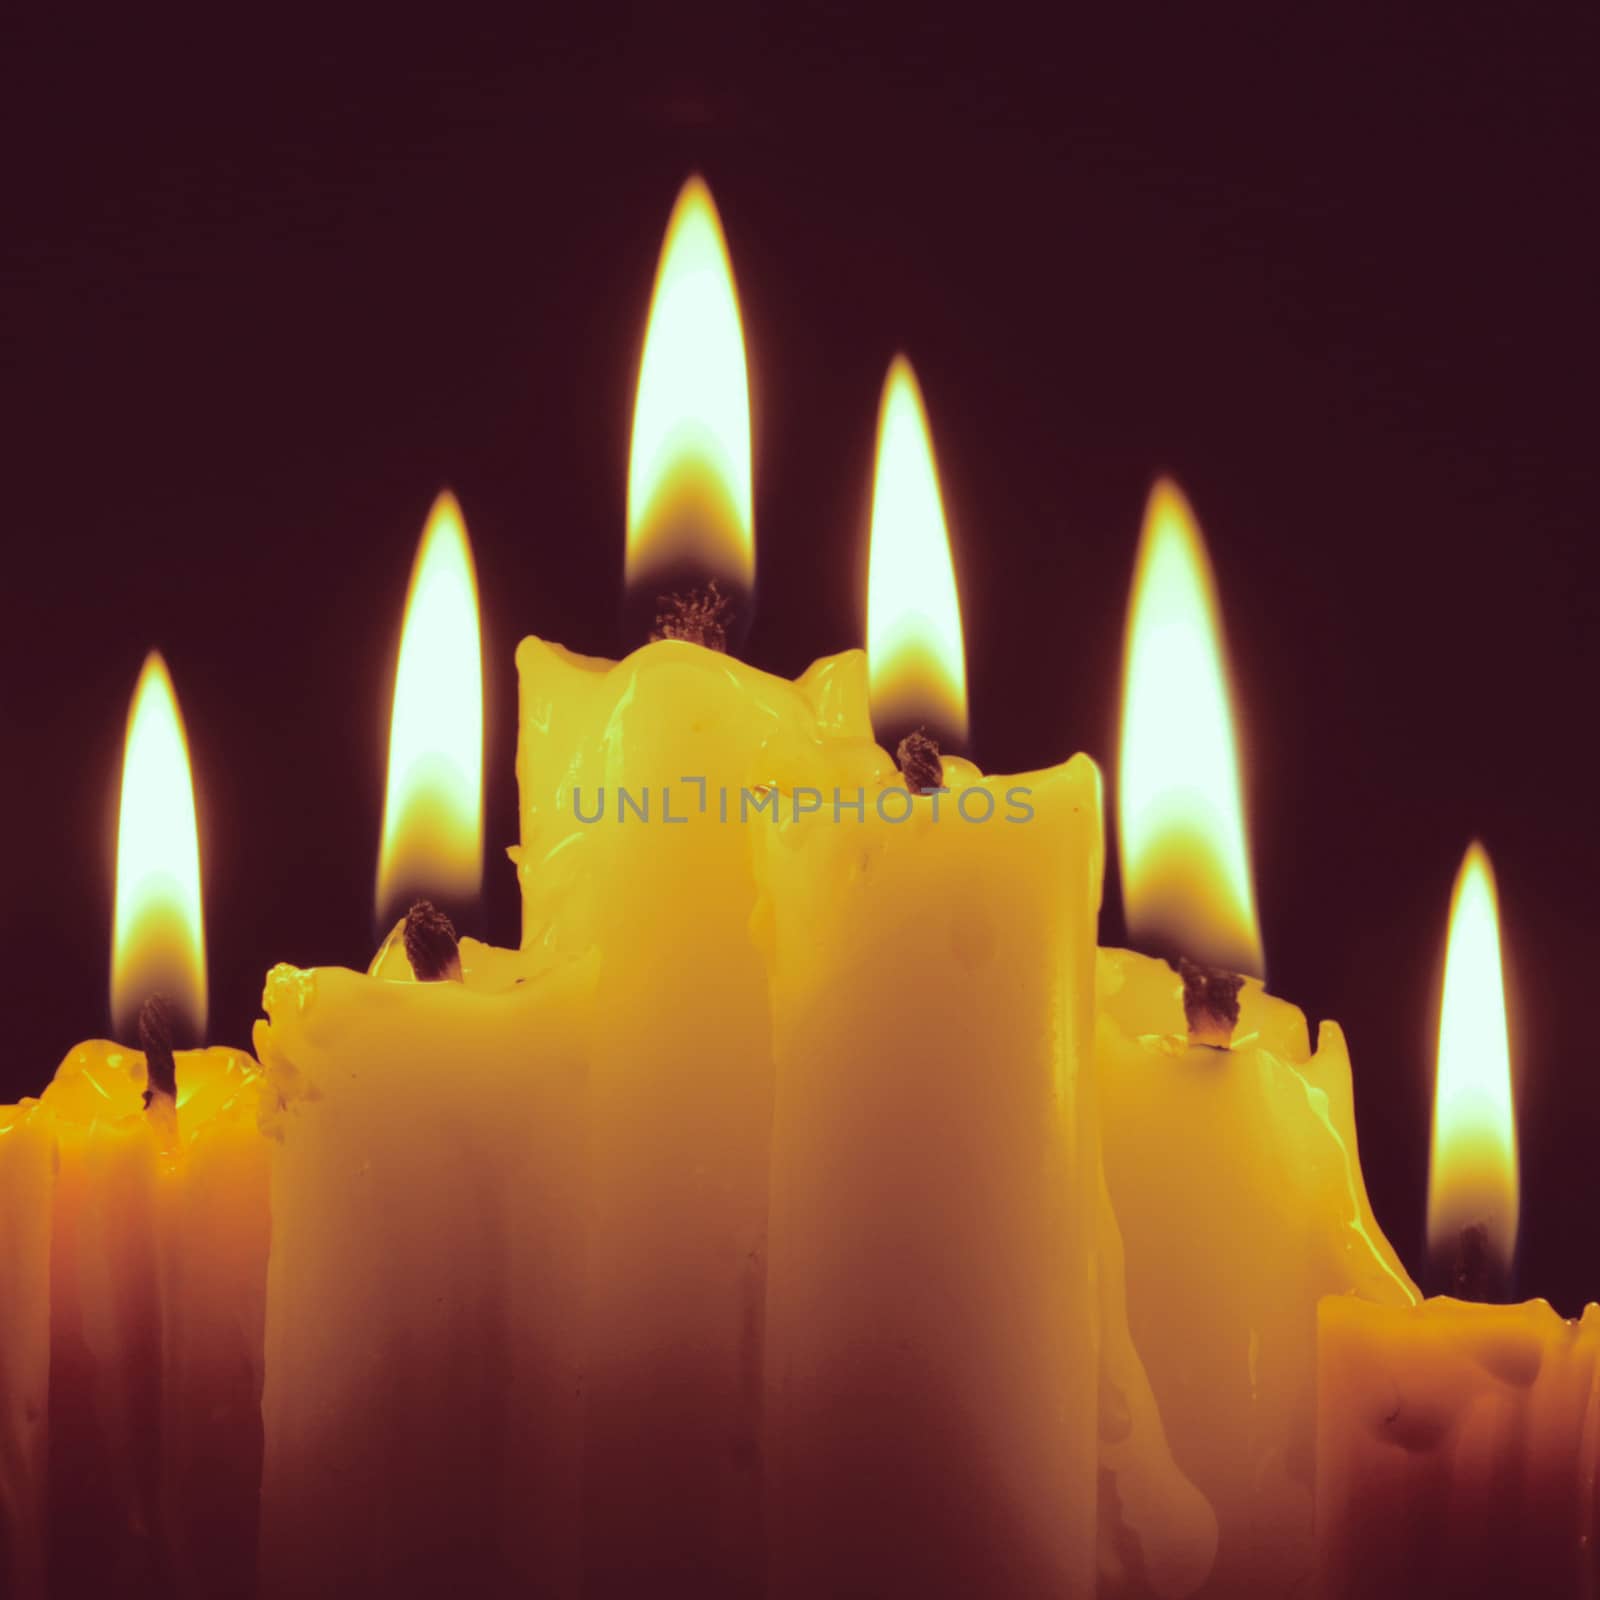 Burning candles on black with retro filter effect by nuchylee